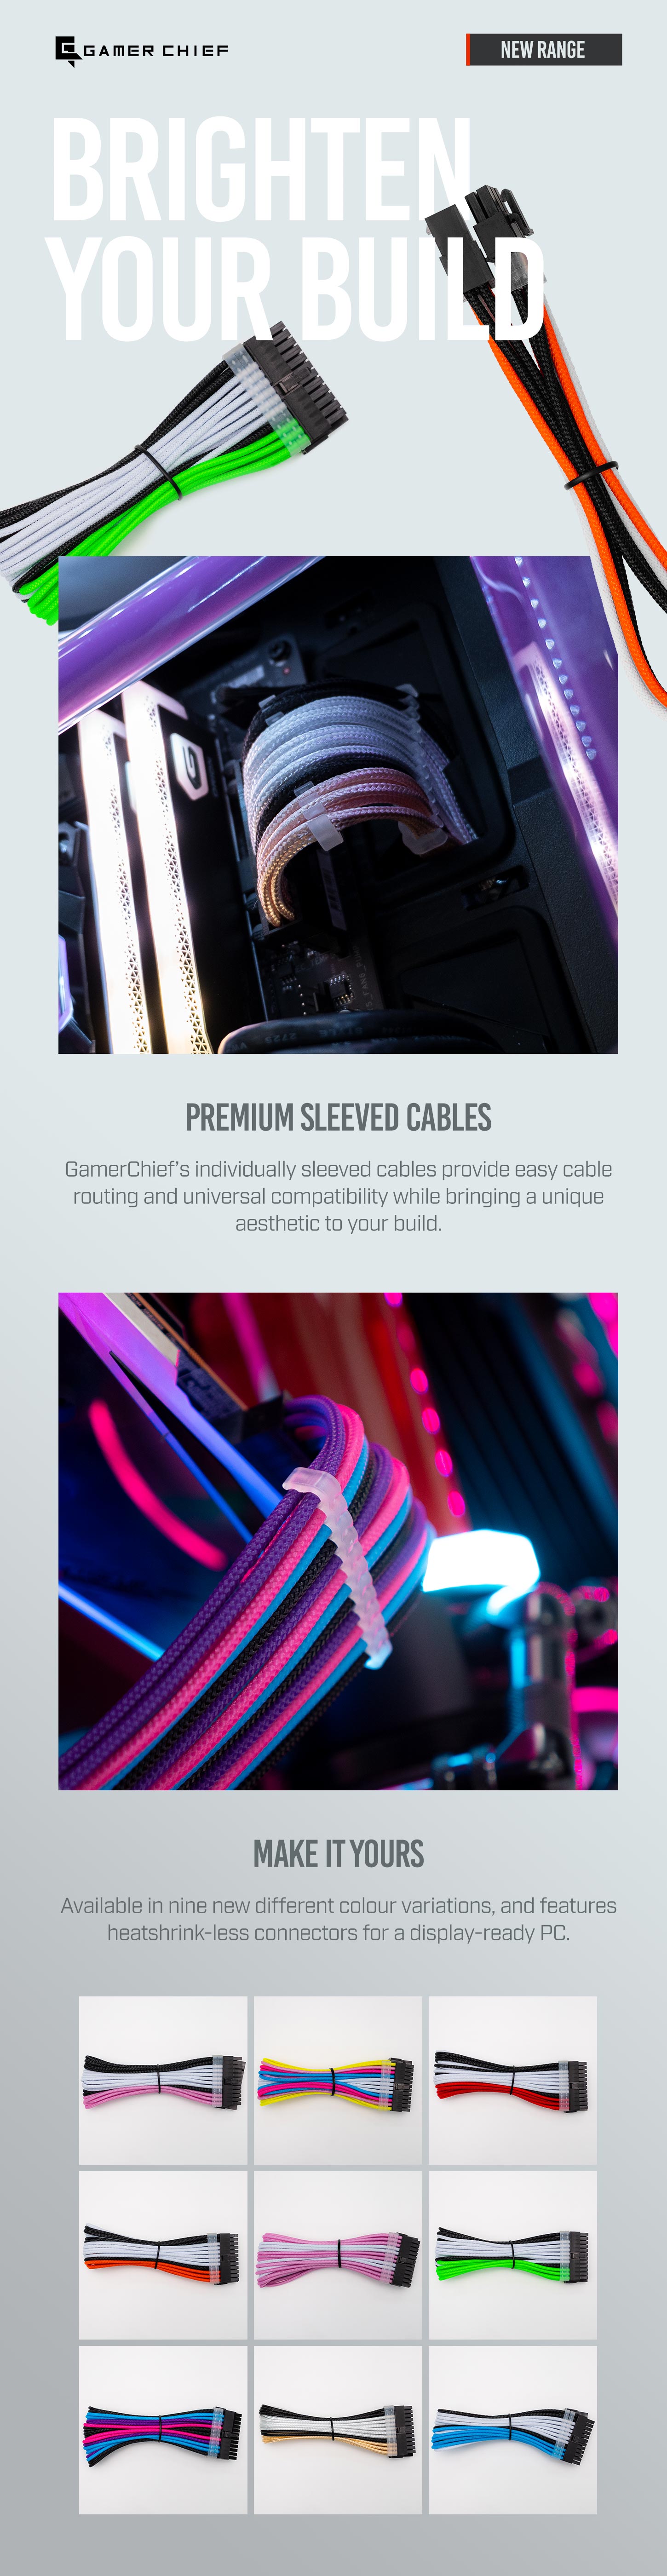 A large marketing image providing additional information about the product GamerChief Elite Series 8-Pin PCIe 30cm Sleeved Extension Cable (Gold/White/Black) - Additional alt info not provided